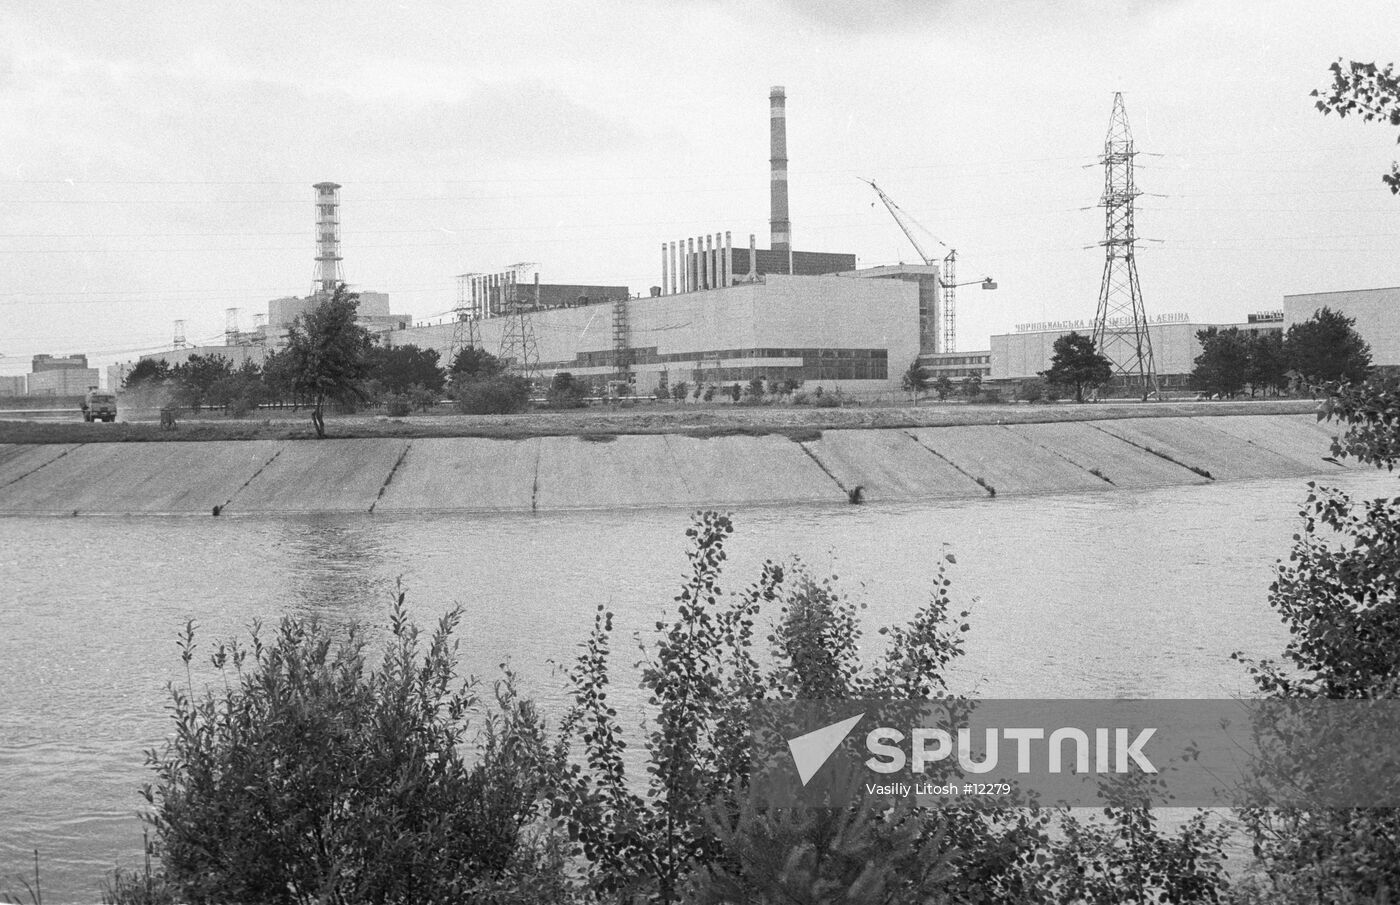 CHERNOBYL NUCLEAR POWER PLANT